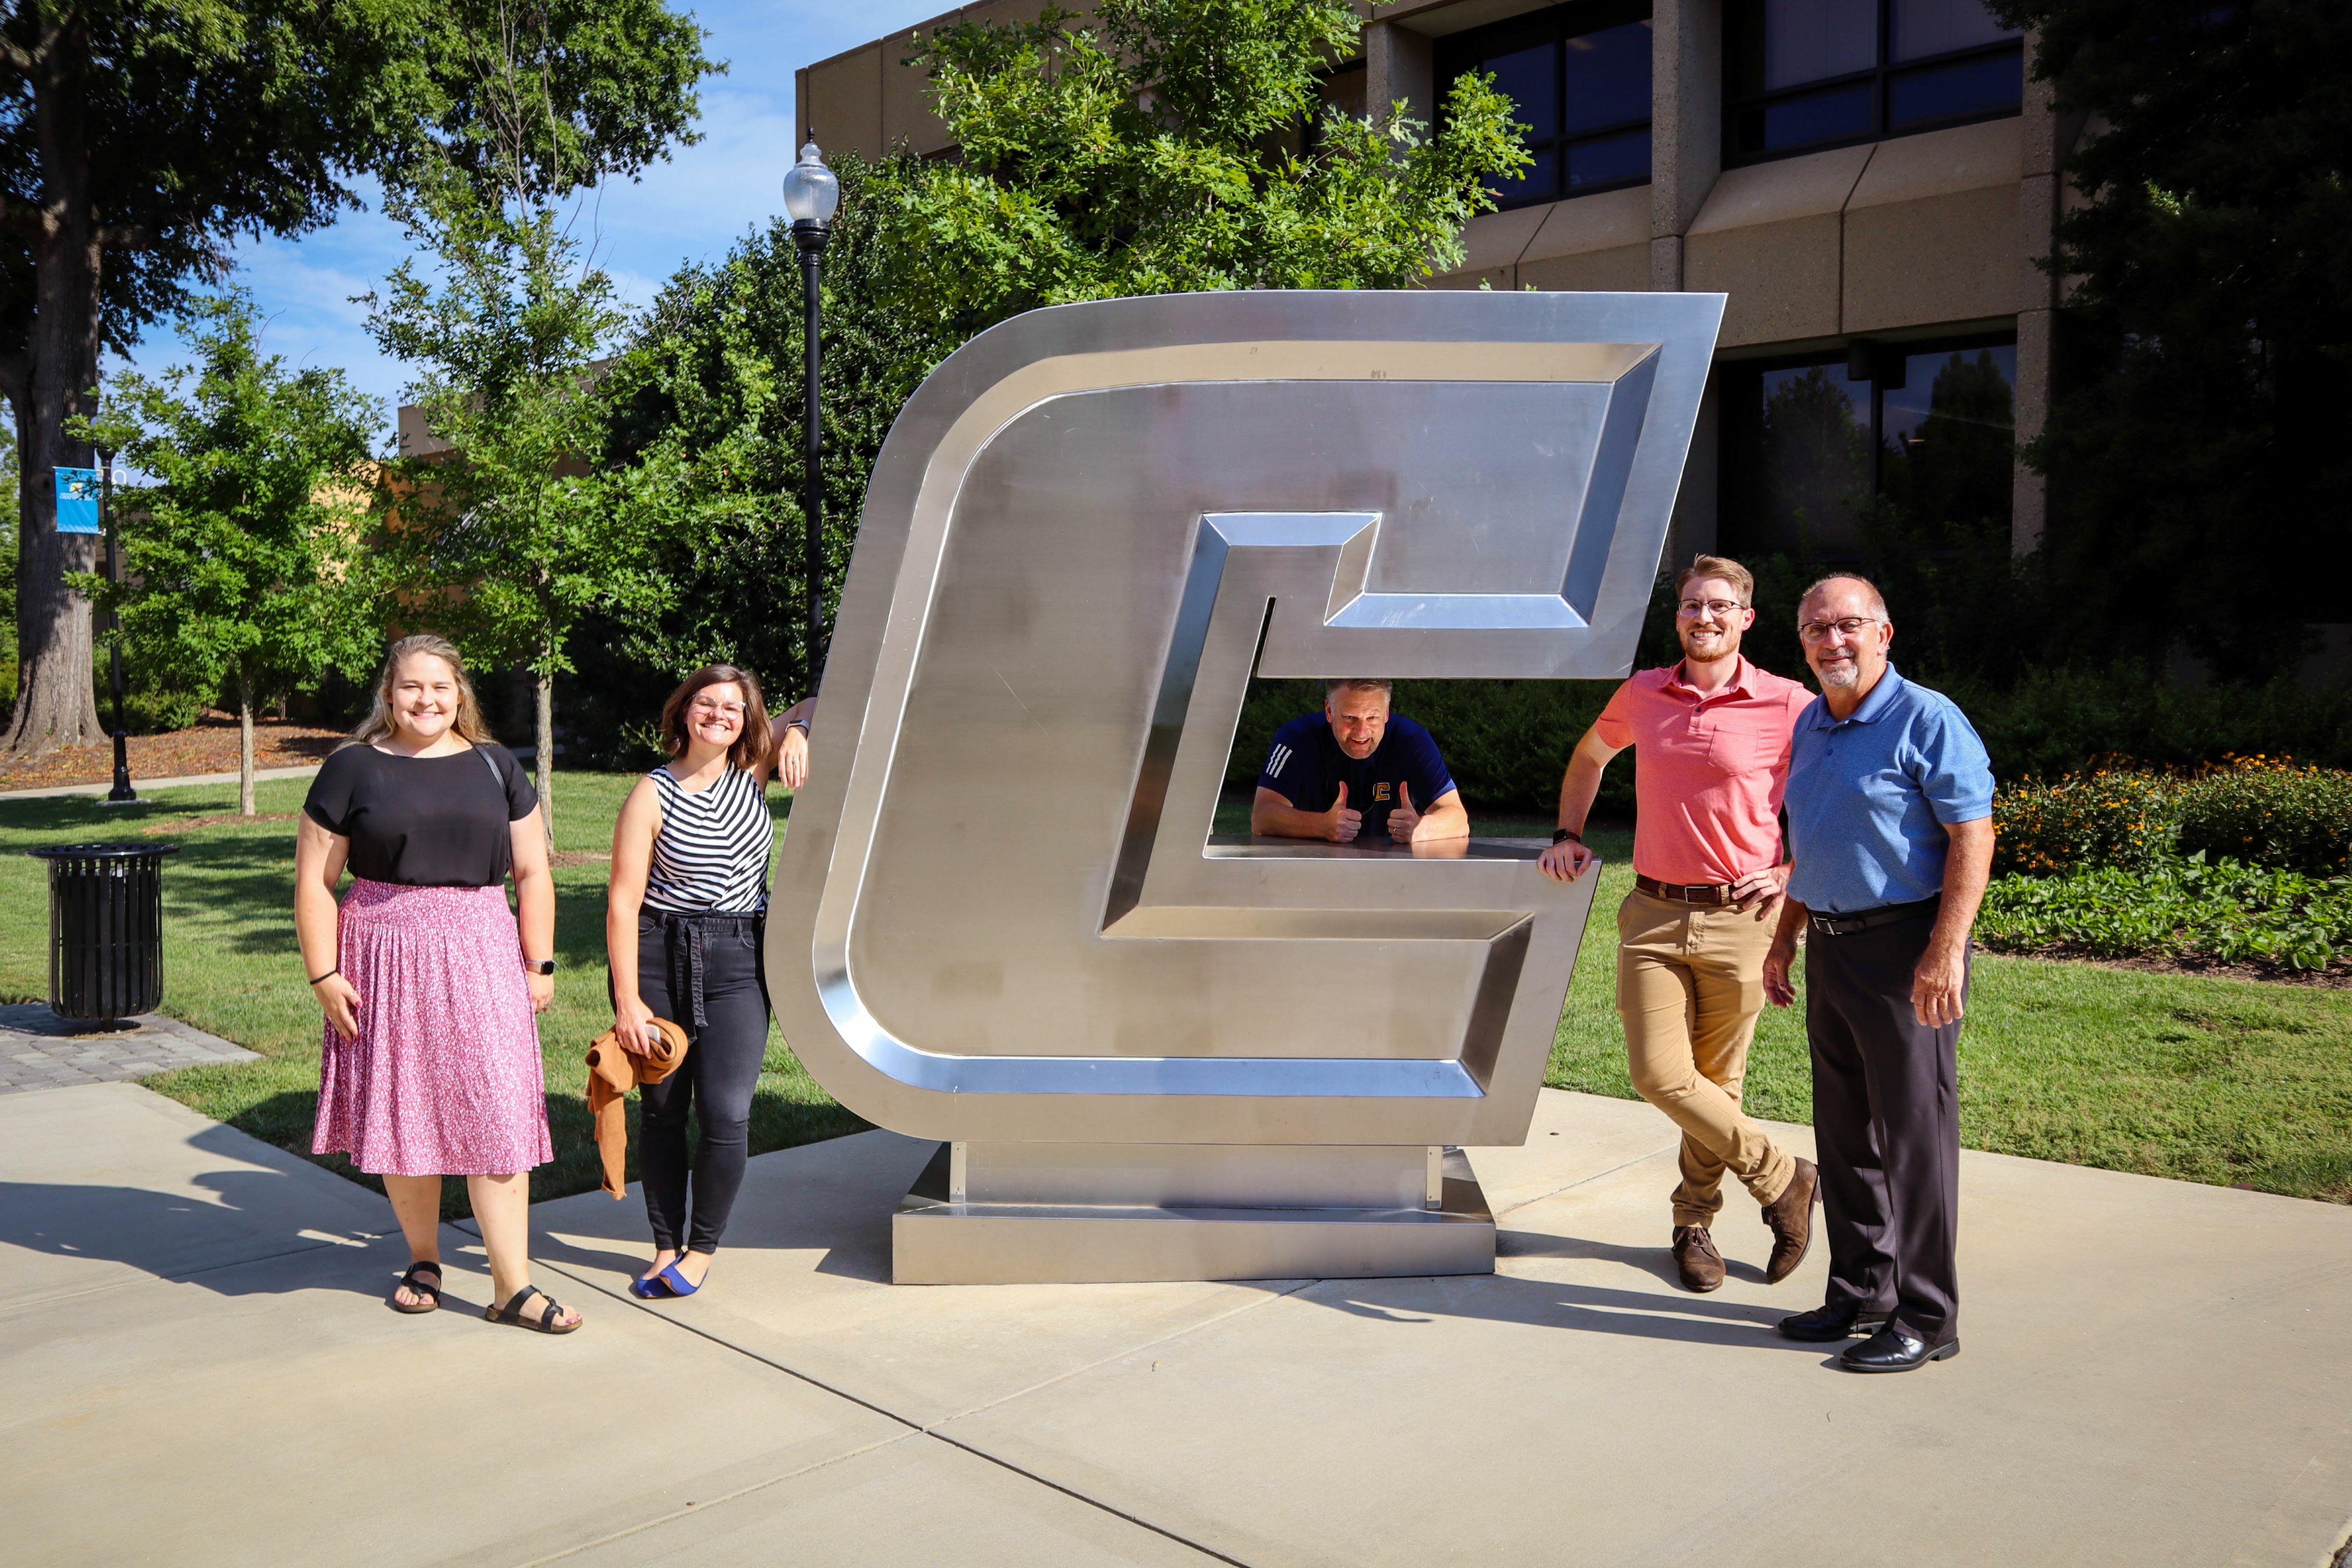 The RSC team poses with Dr. Allen Pratt (pictured center) and NREA President Dave Ardrey on UTC's Campus.